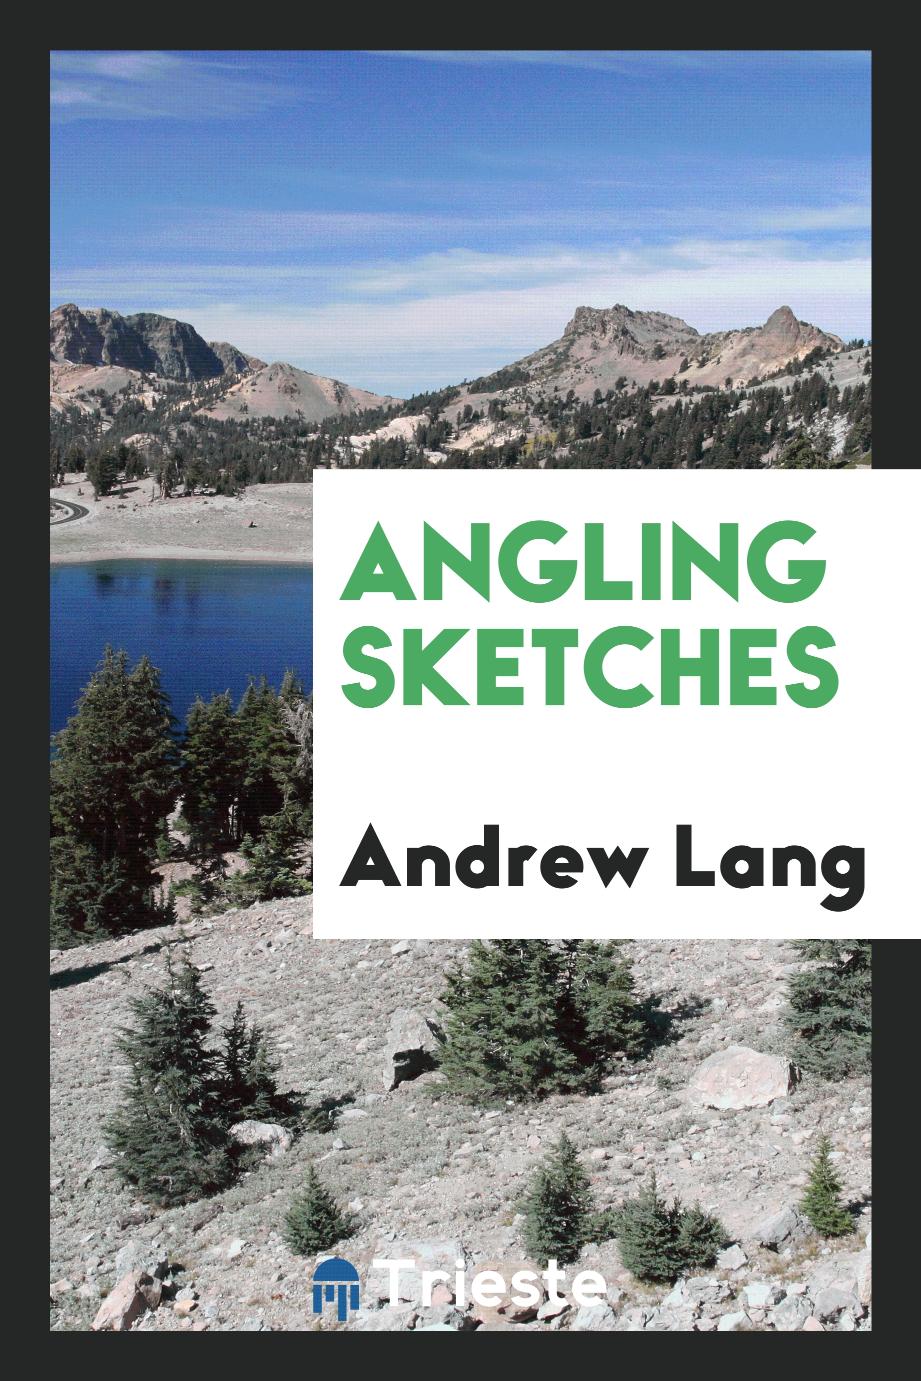 Angling sketches